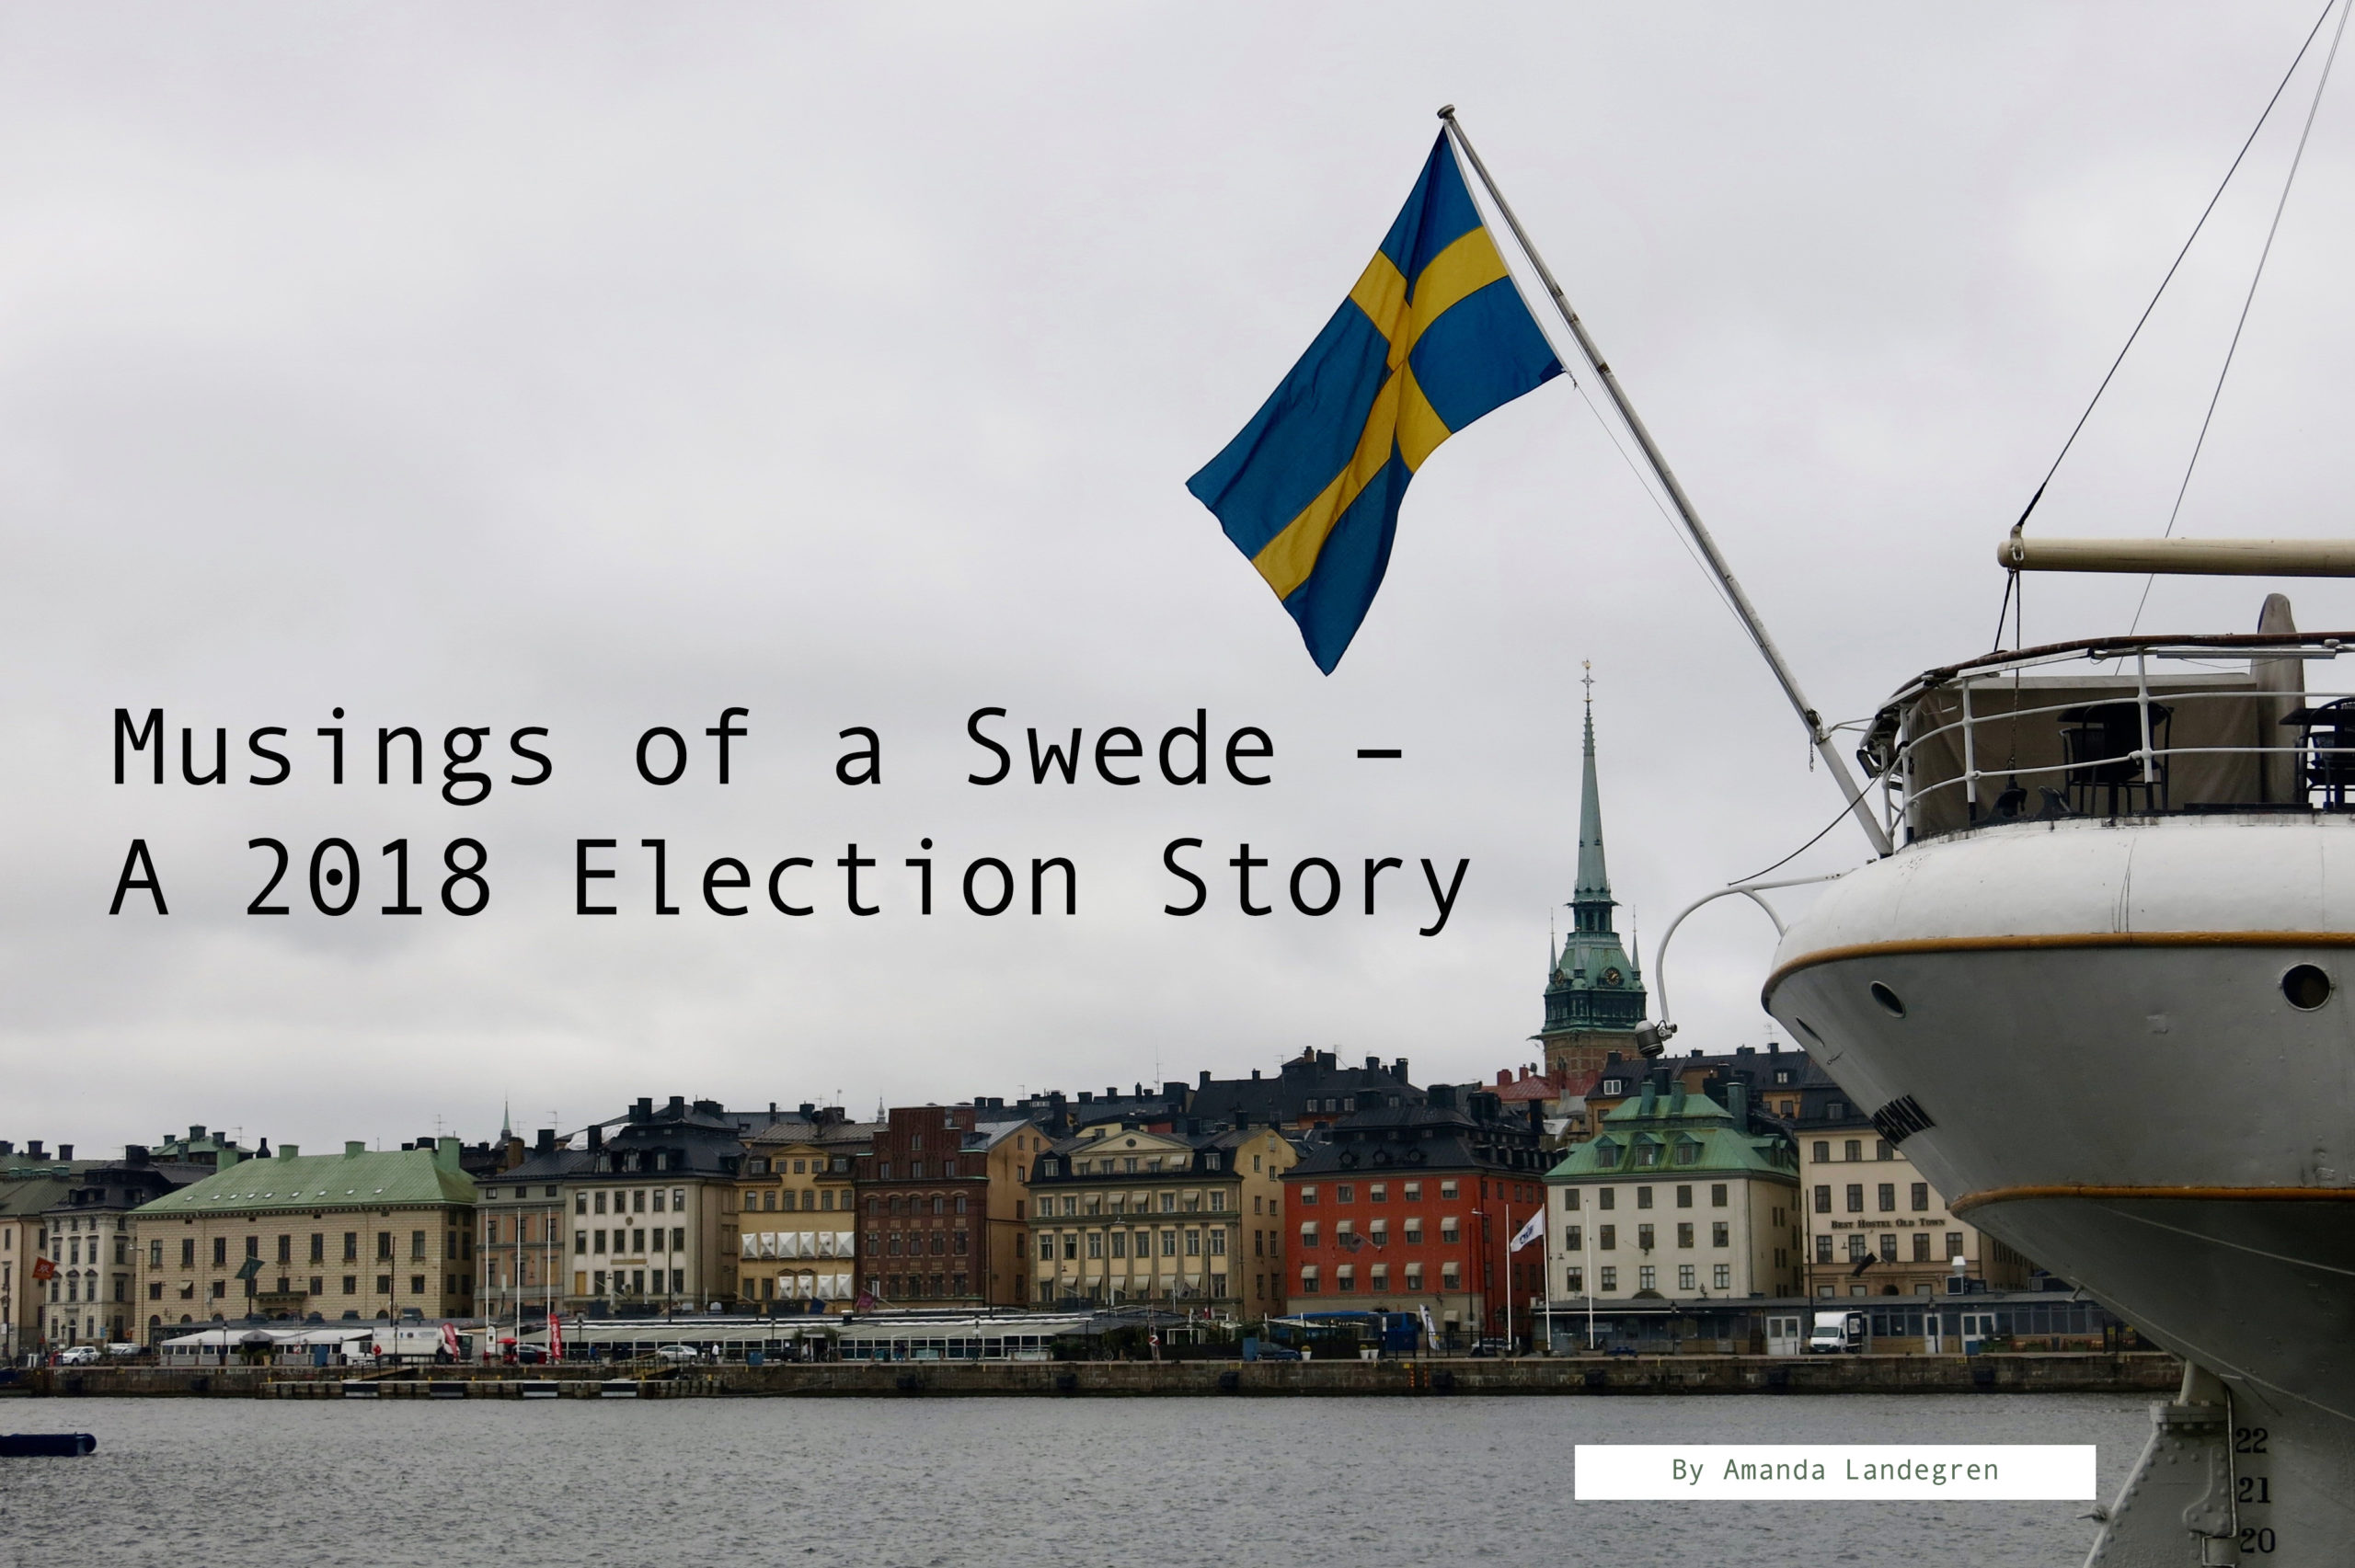 Musings of a Swede: A 2018 Election story